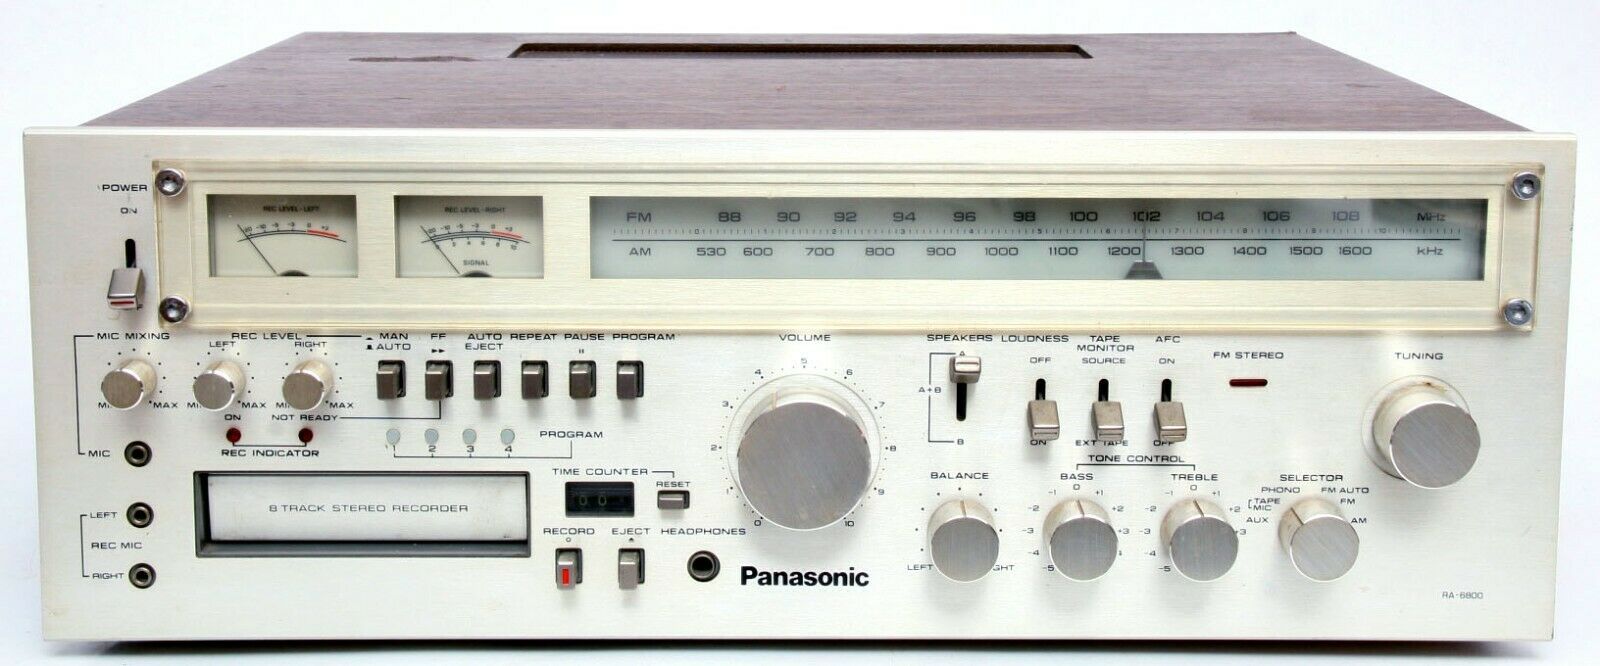 Panasonic Ra-6800 Am/fm Receiver With 8-track Player, Lot 650